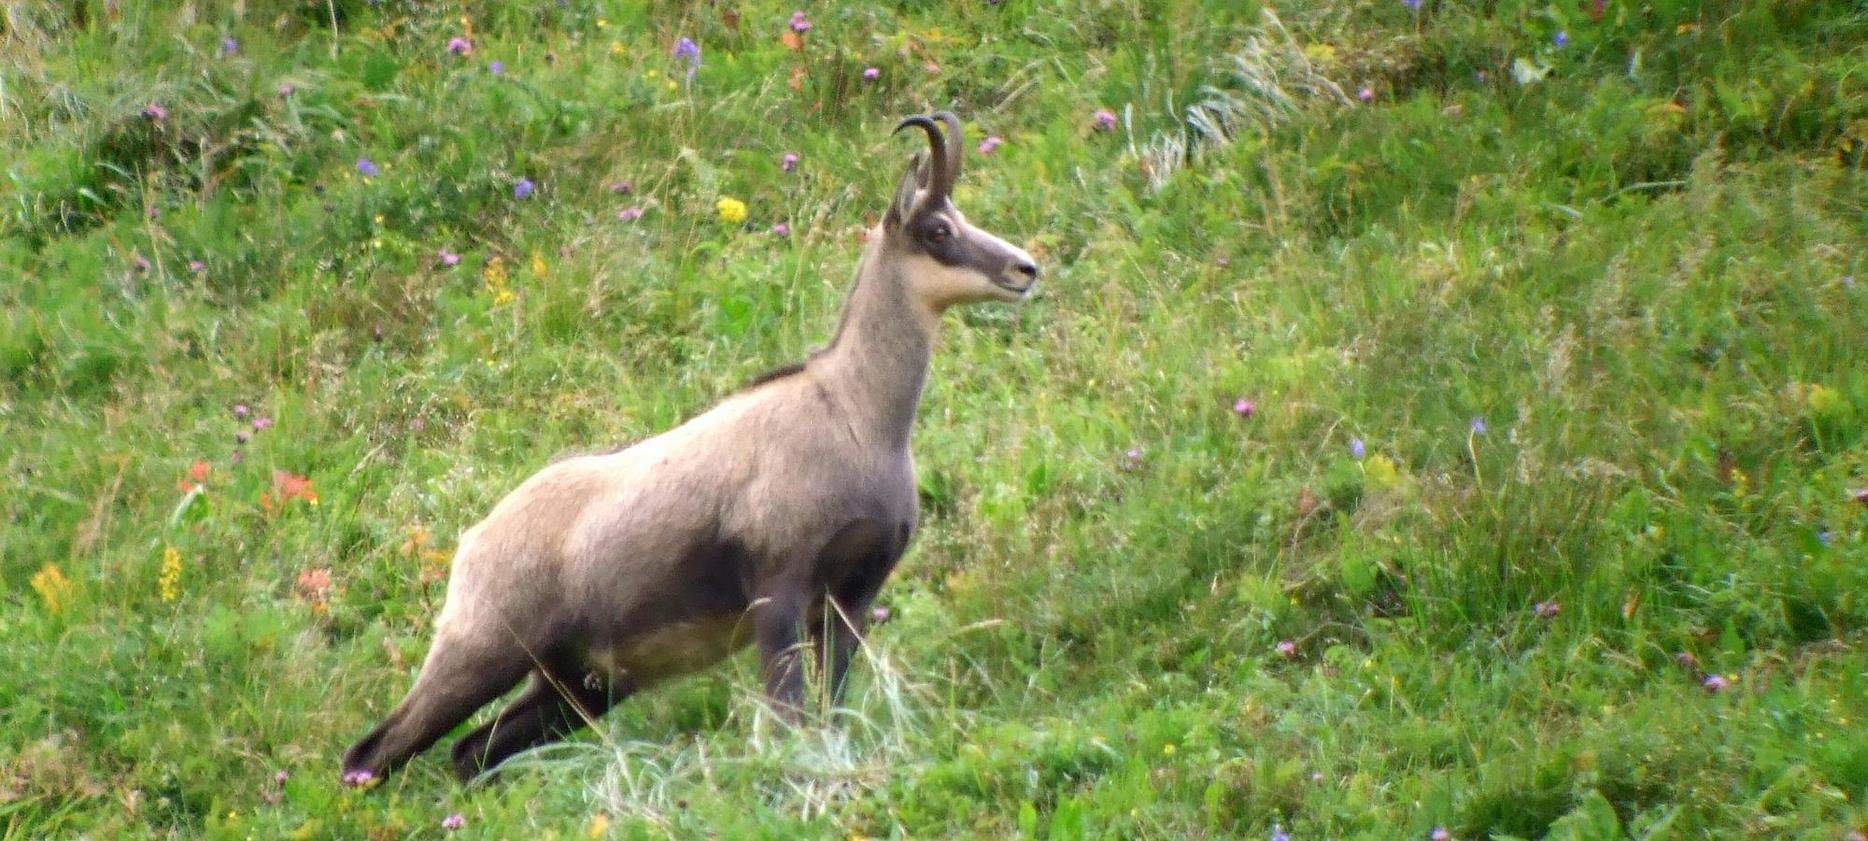 Super Besse - Chamois in the Sancy Natural Park